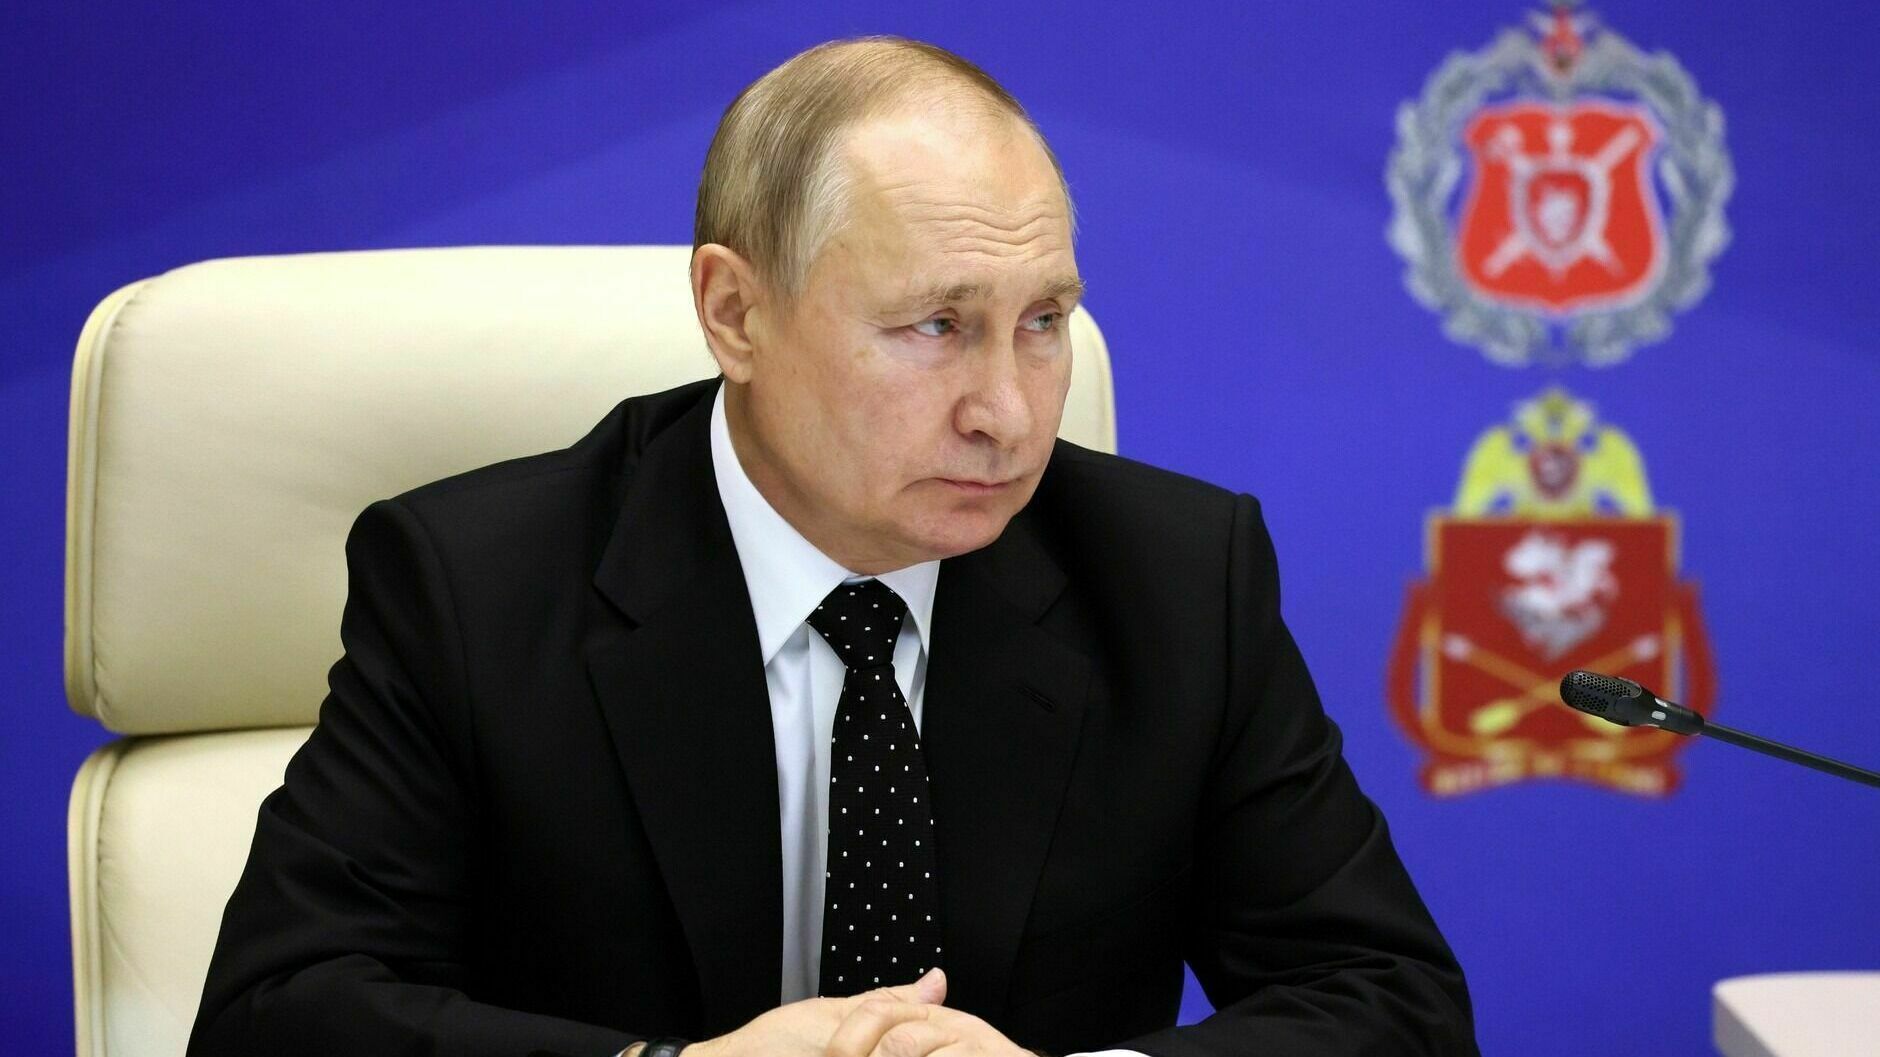 Kommersant: the Kremlin has begun preparations for the 2024 elections with Putin's participation